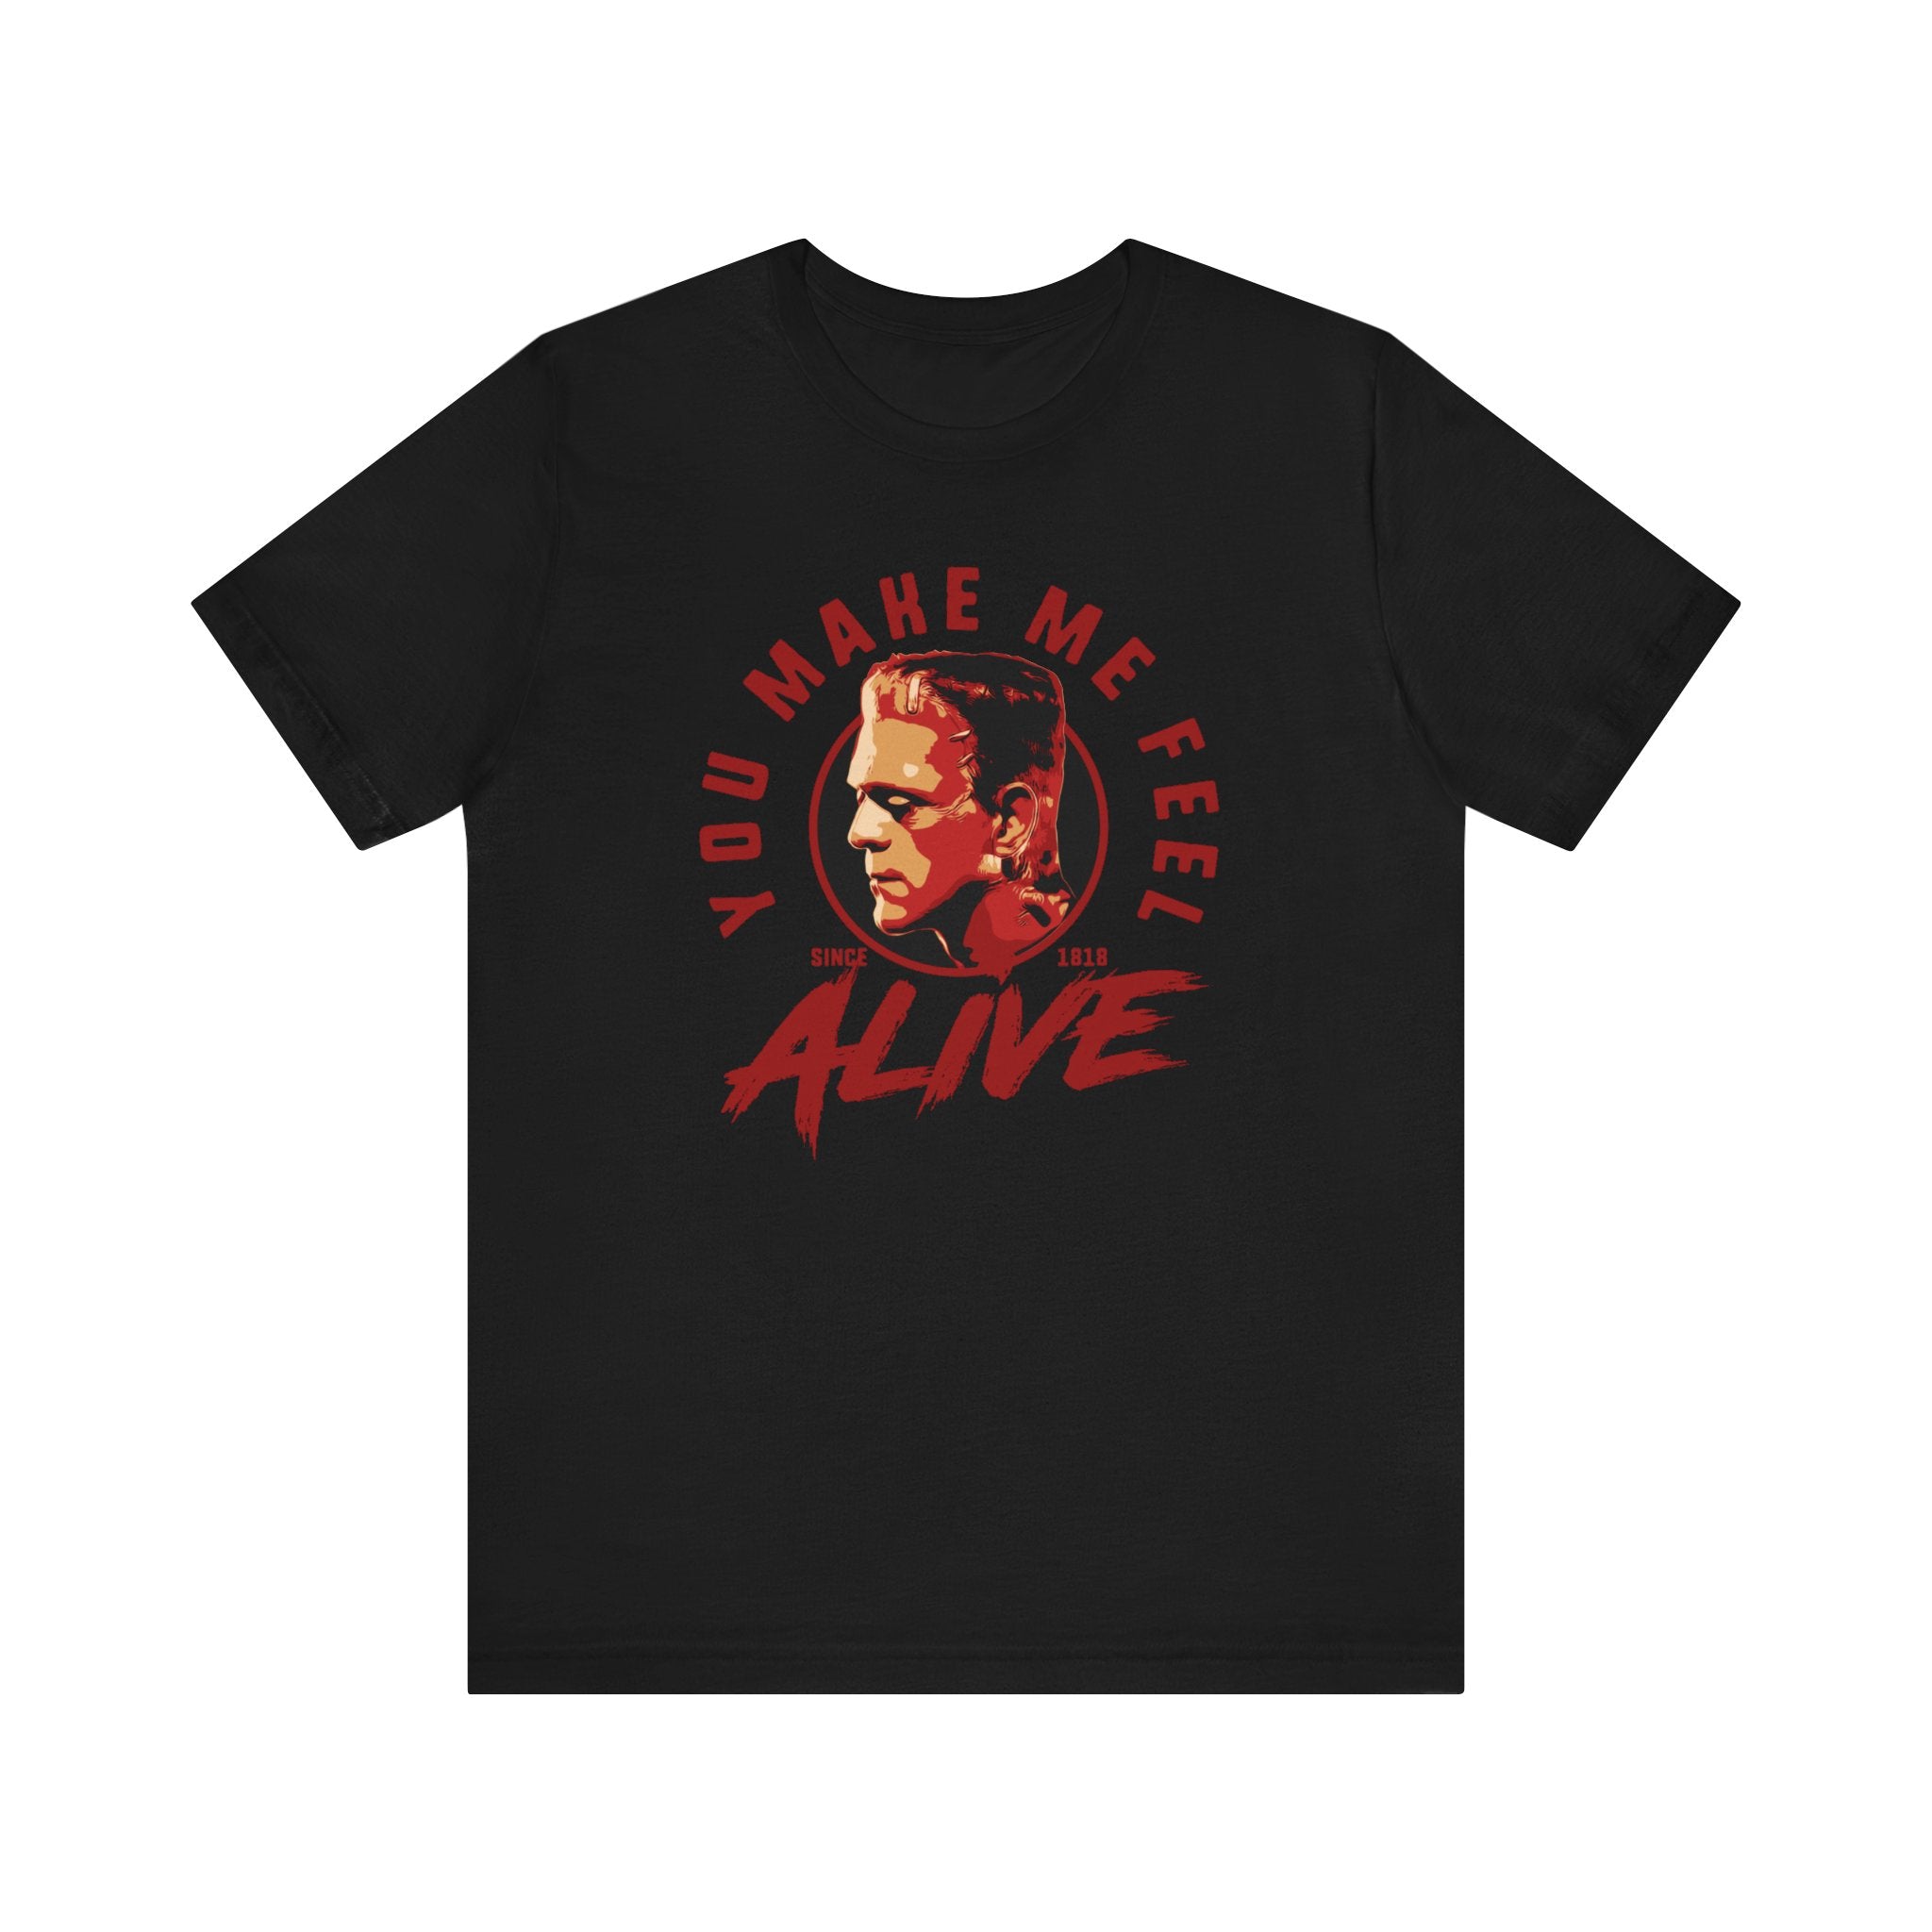 Black unisex tee featuring a graphic of a man's face in red tones with the You Make Me Feel Alive printed in stylized red text.